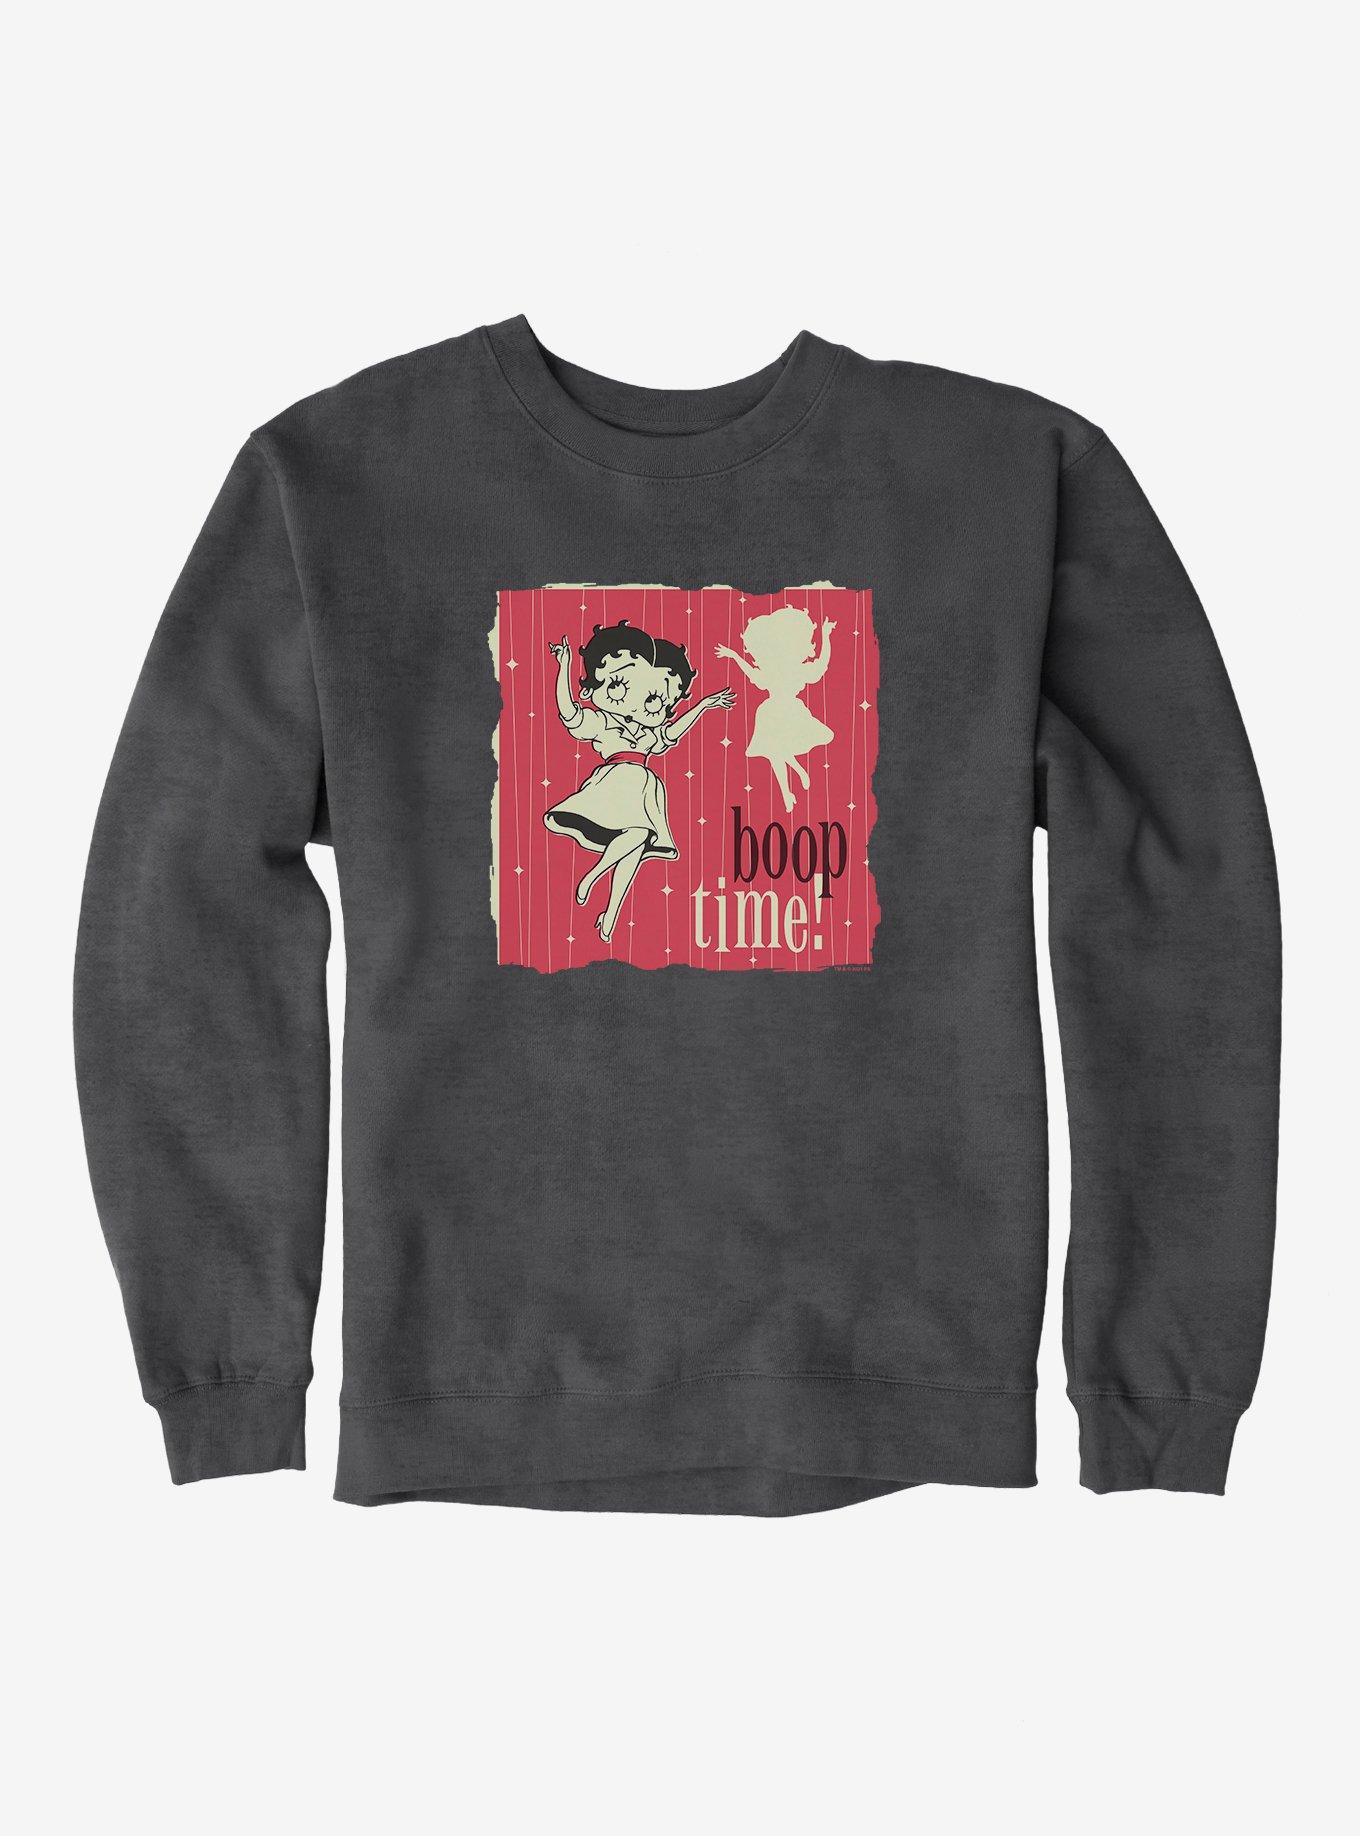 Betty Boop Time For A Boop Sweatshirt, , hi-res